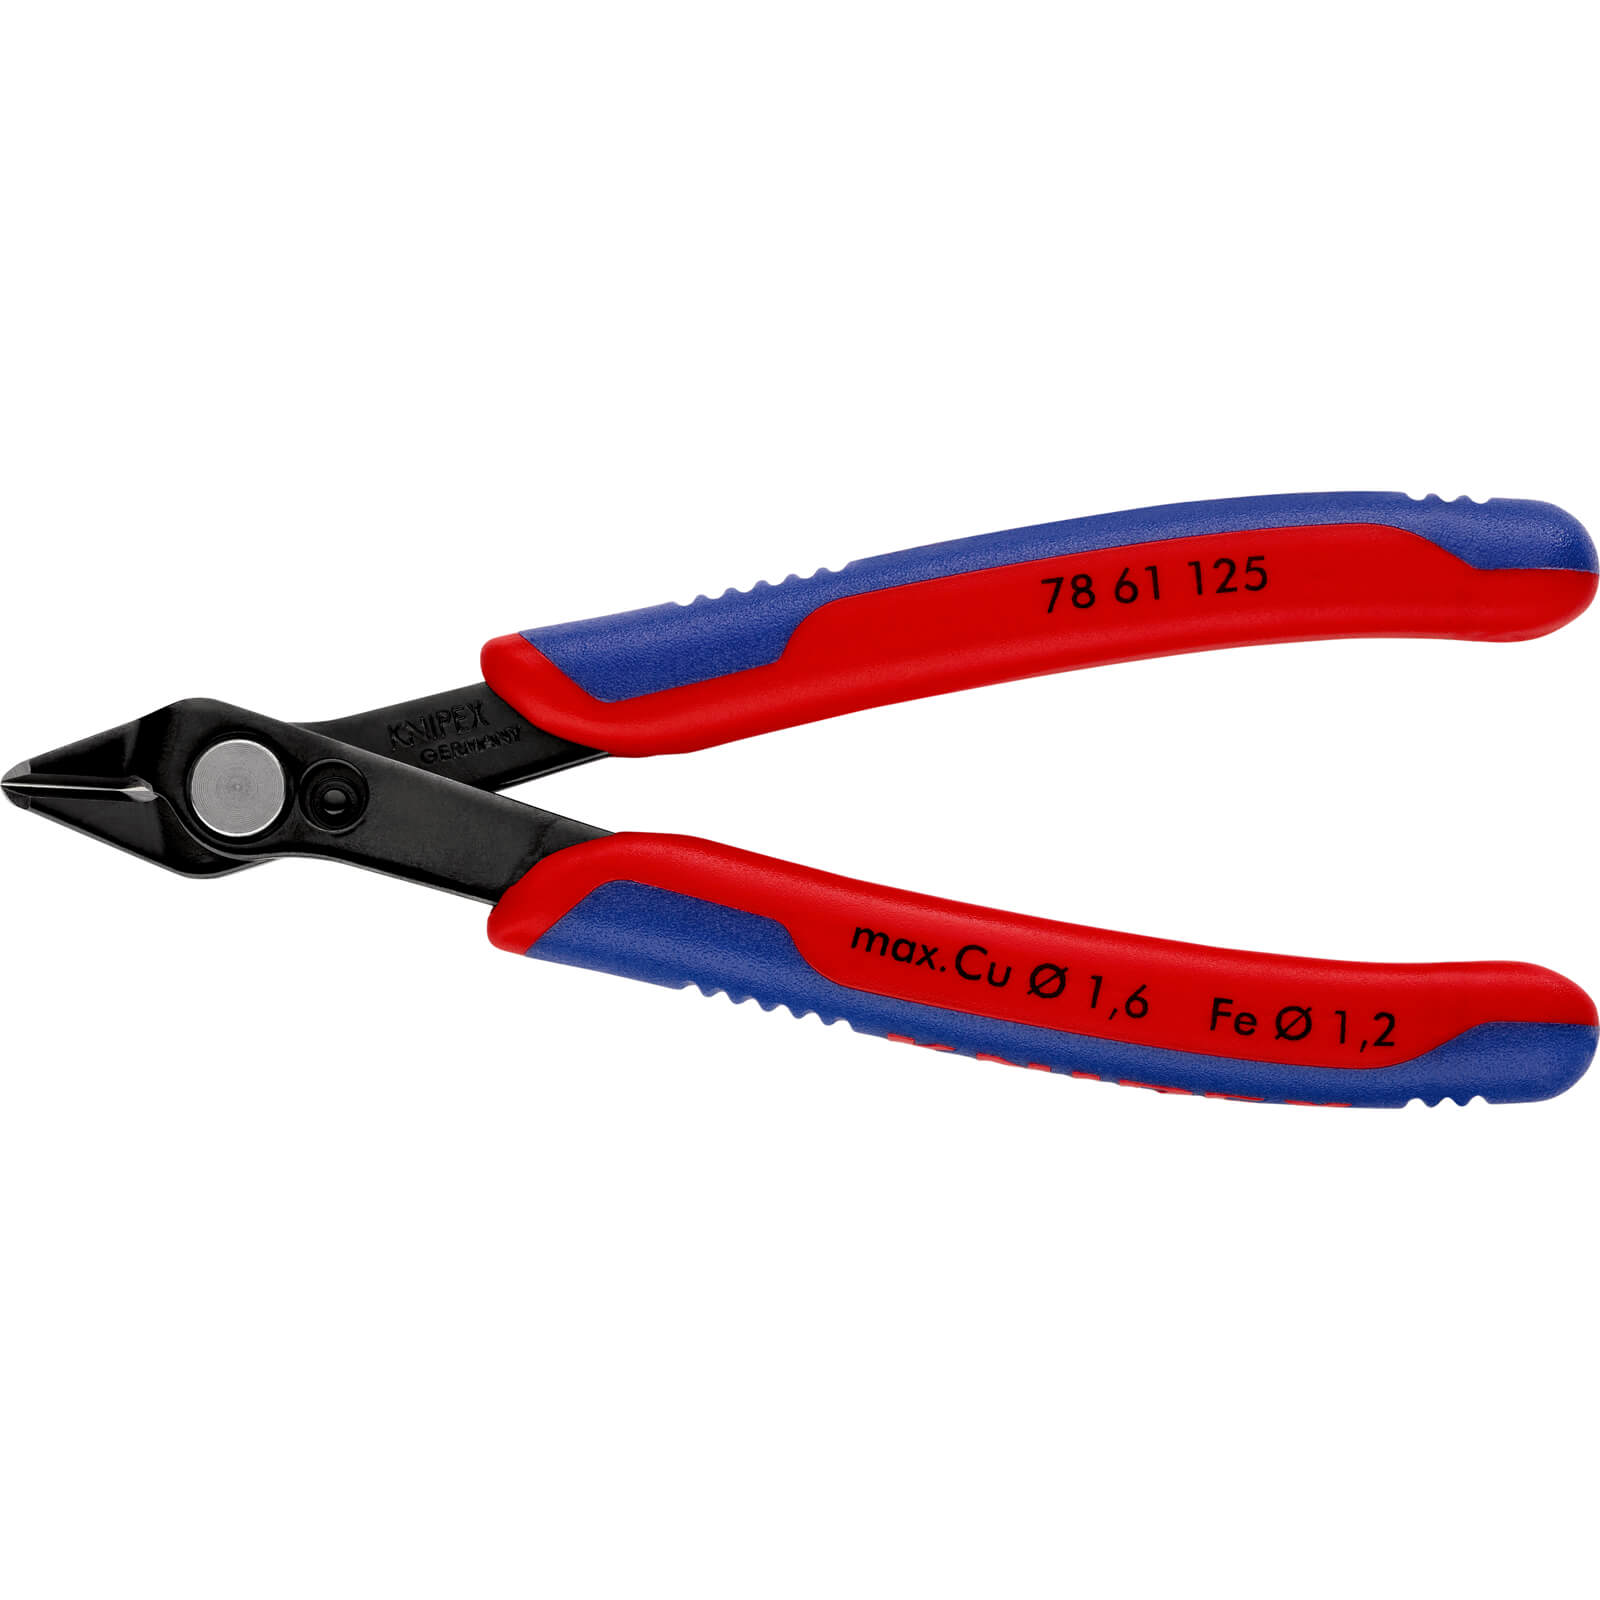 Photo of Knipex 78 61 Electronics Super Knips Pliers 125mm